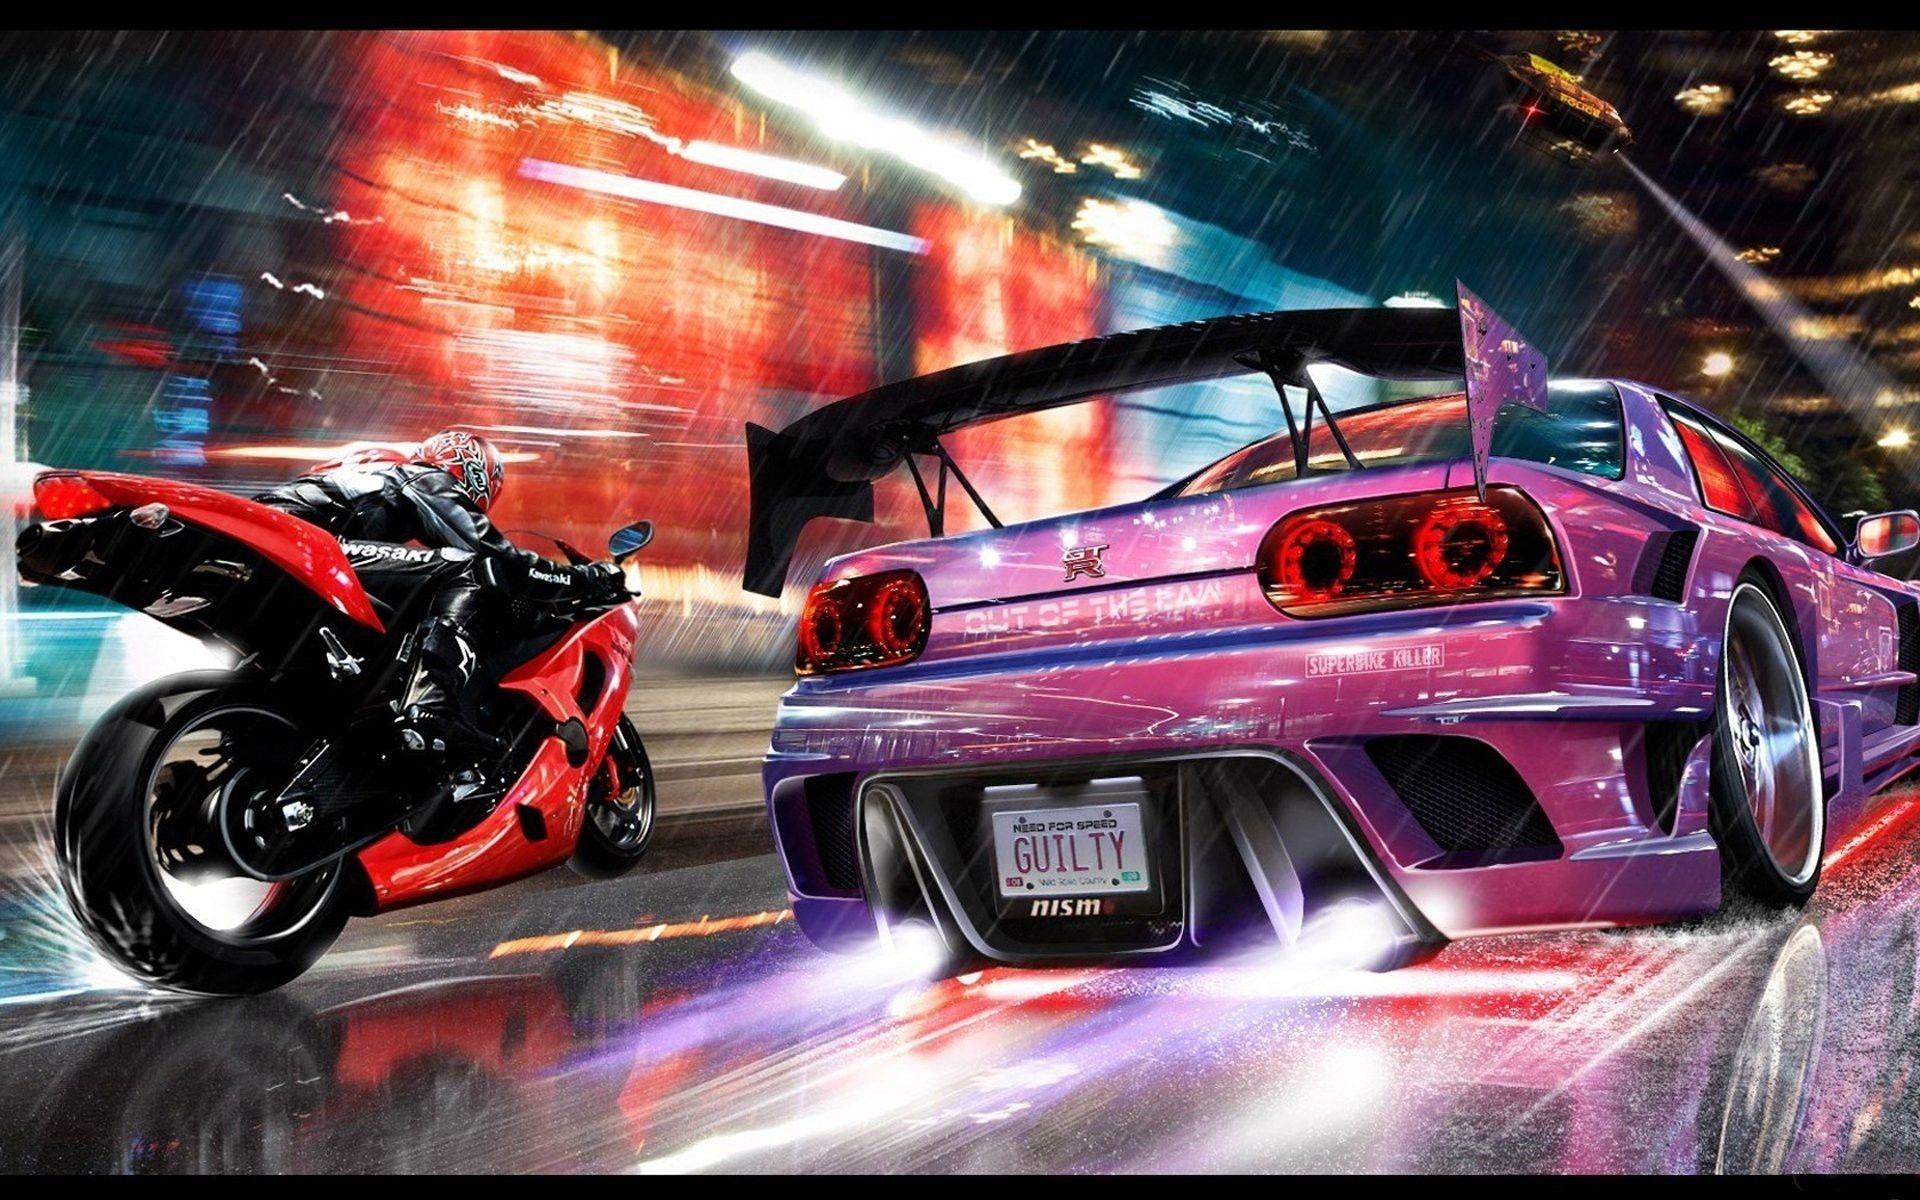 NFS: Out of the Law wallpaper games